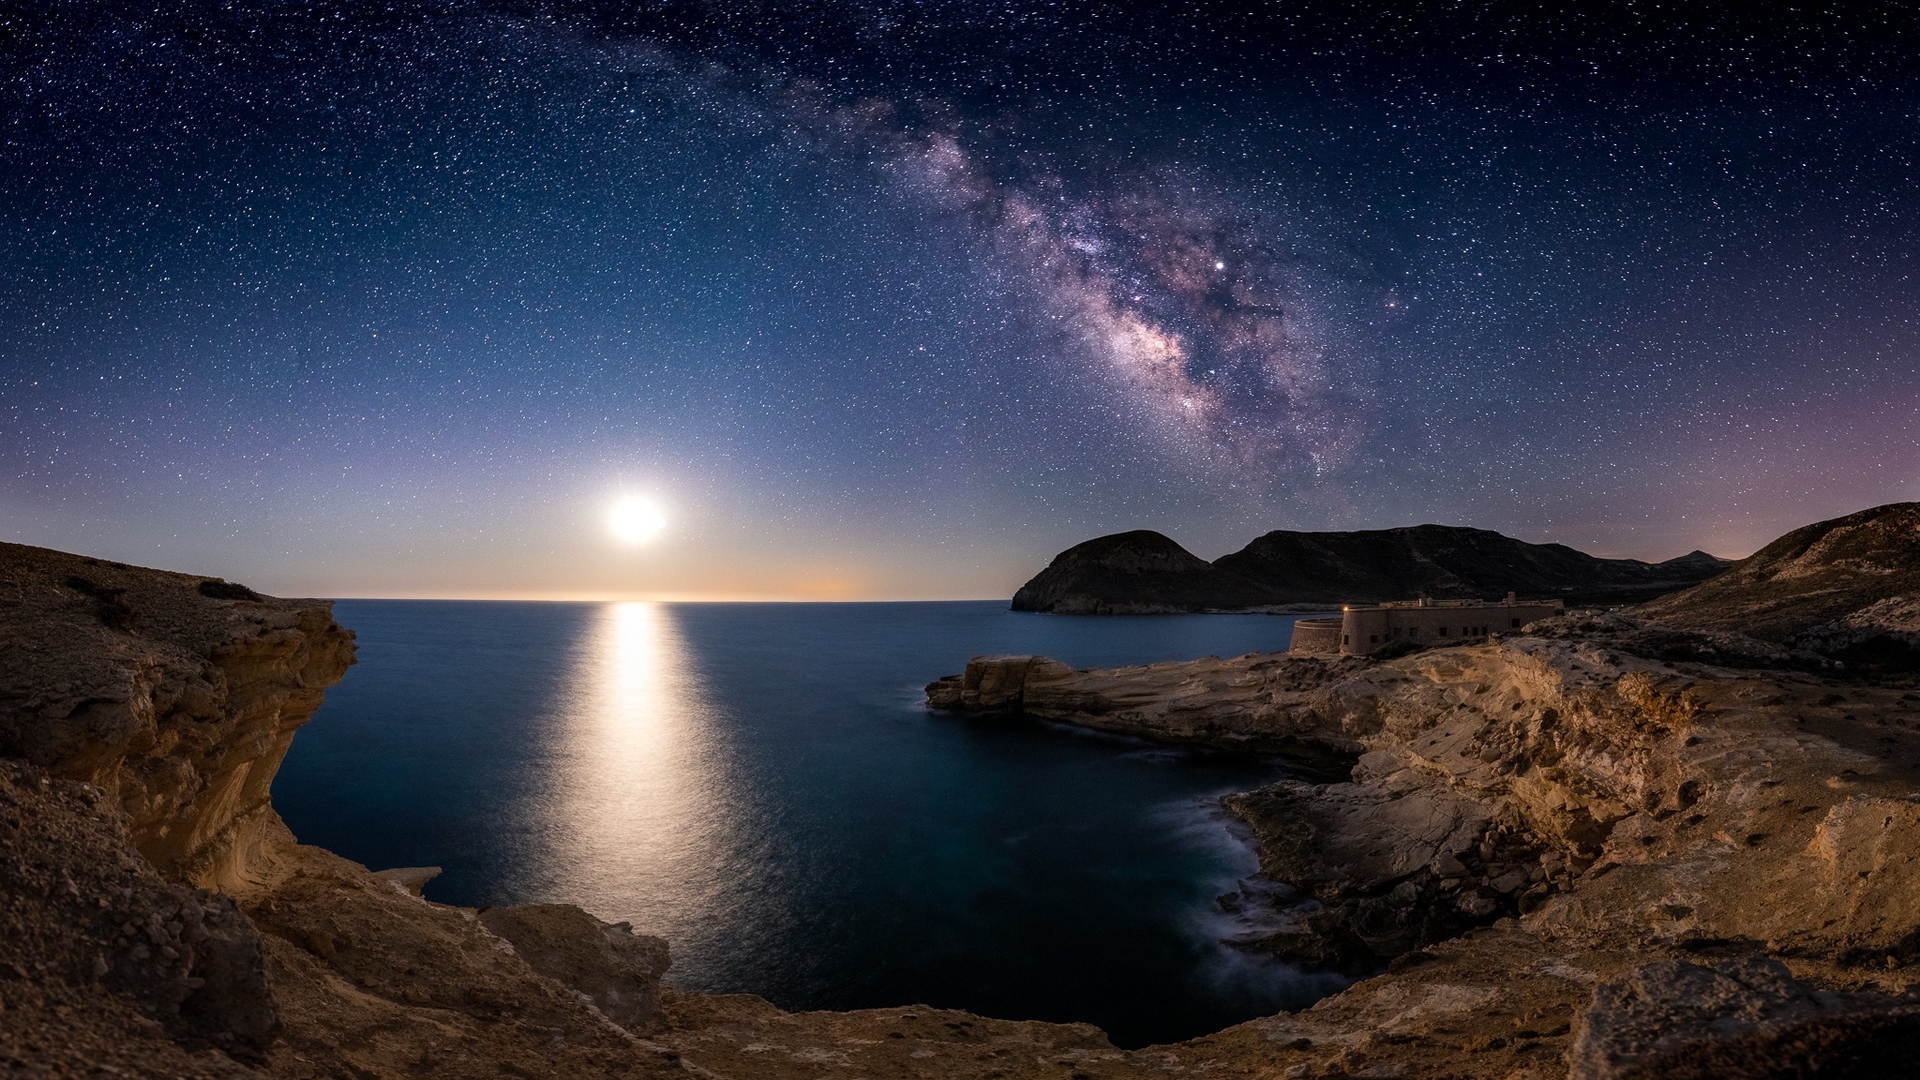 General 1920x1080 sea castle sky Milky Way mountains sunset